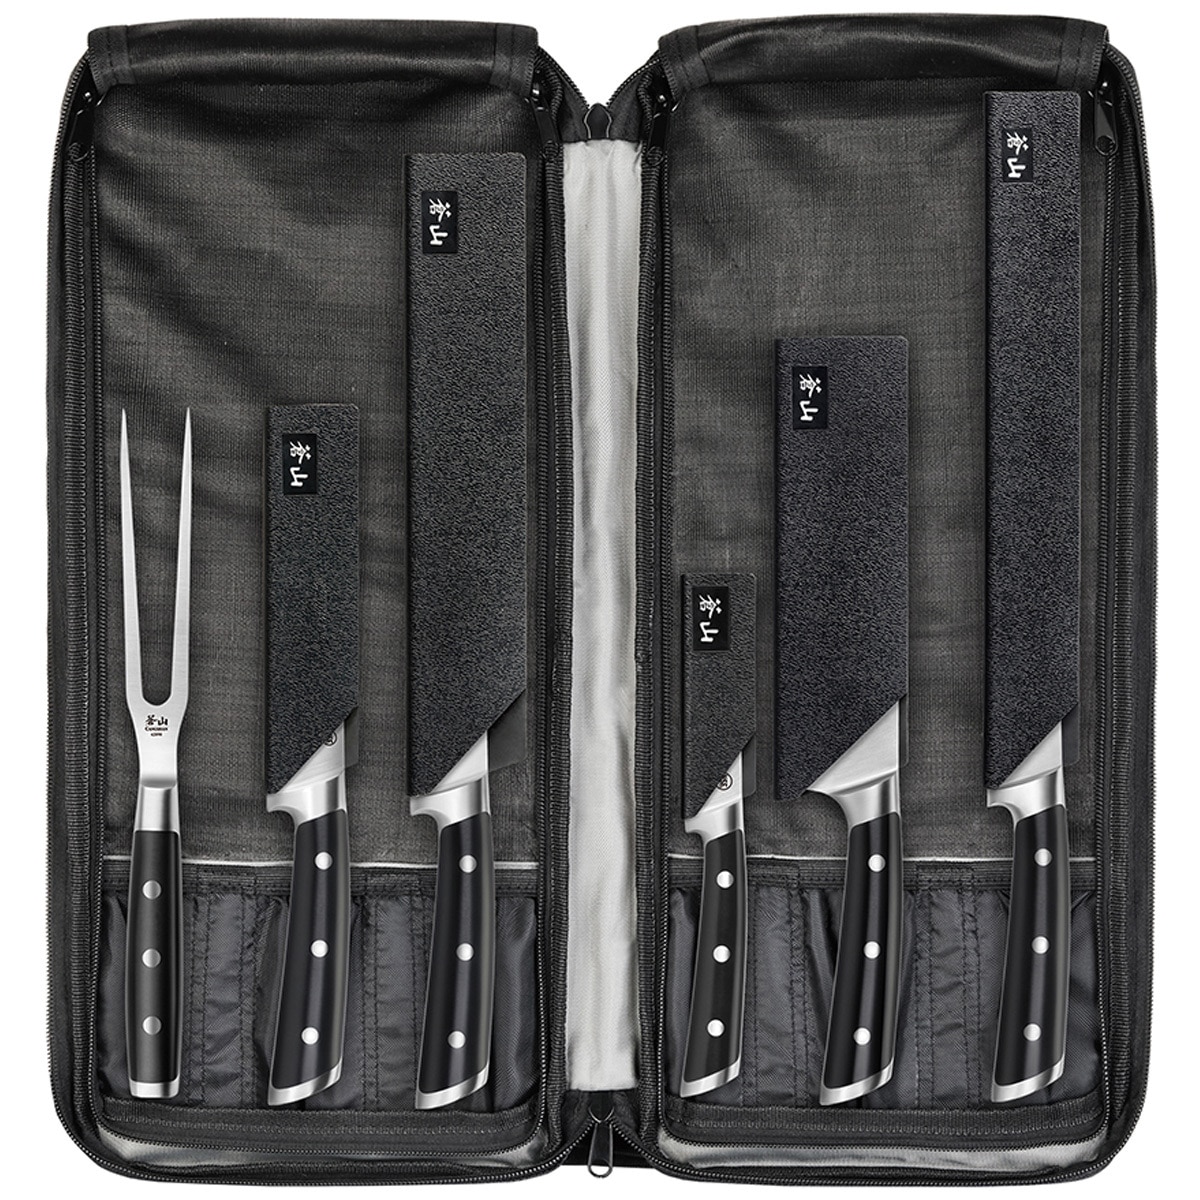 Cangshan S Series German Steel Forged 7-Piece BBQ Knife Set